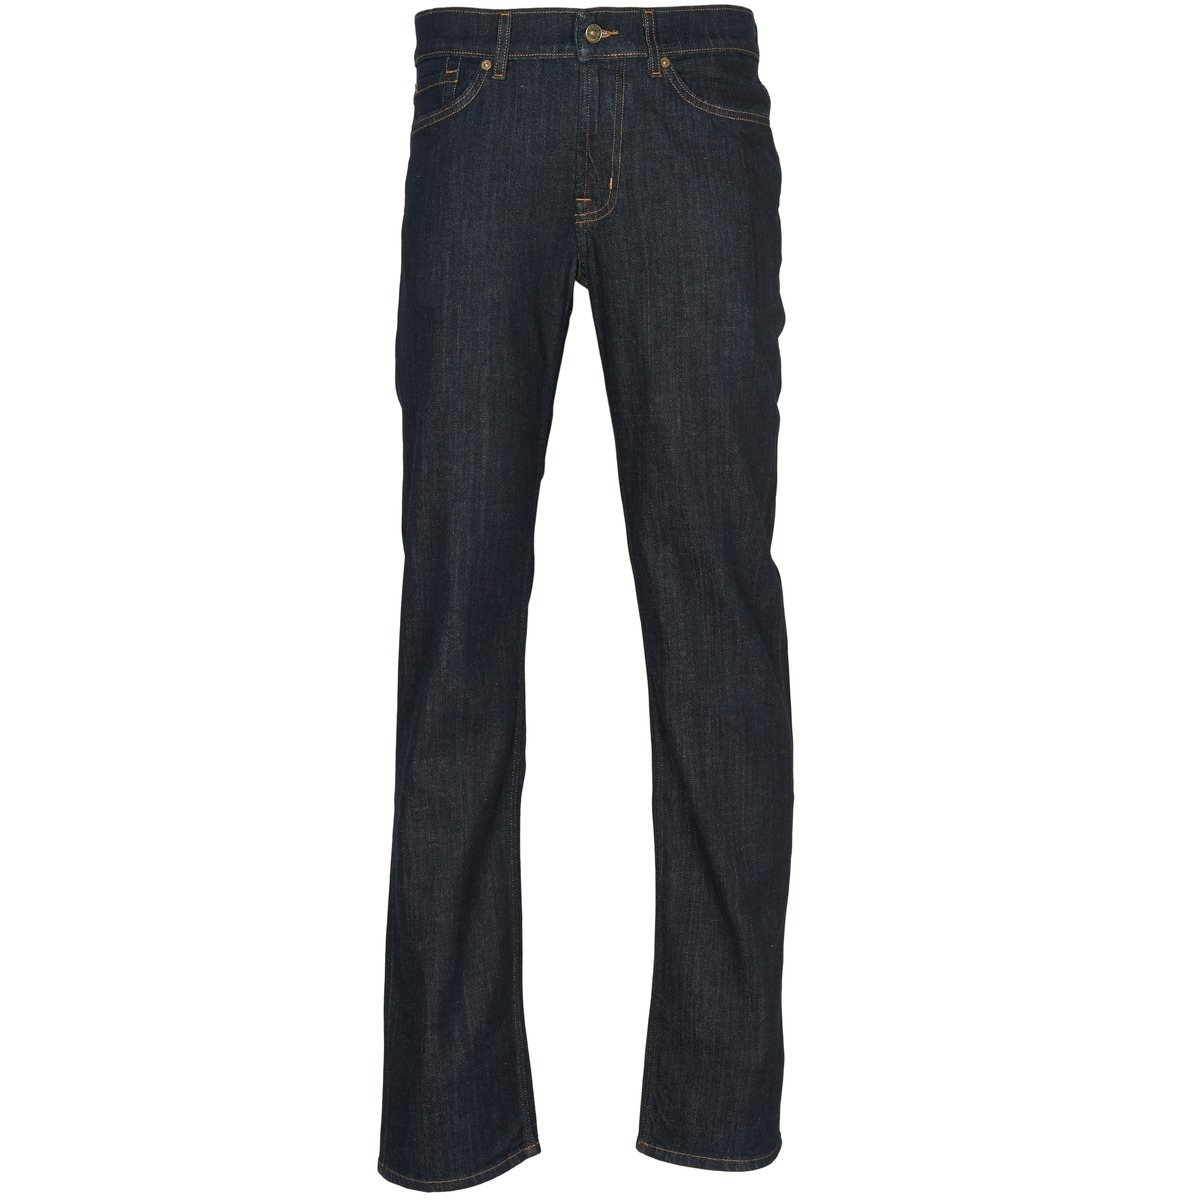 Spartoo - Mens Skinny Jeans - Blue - 7 For All Mankind GOOFASH